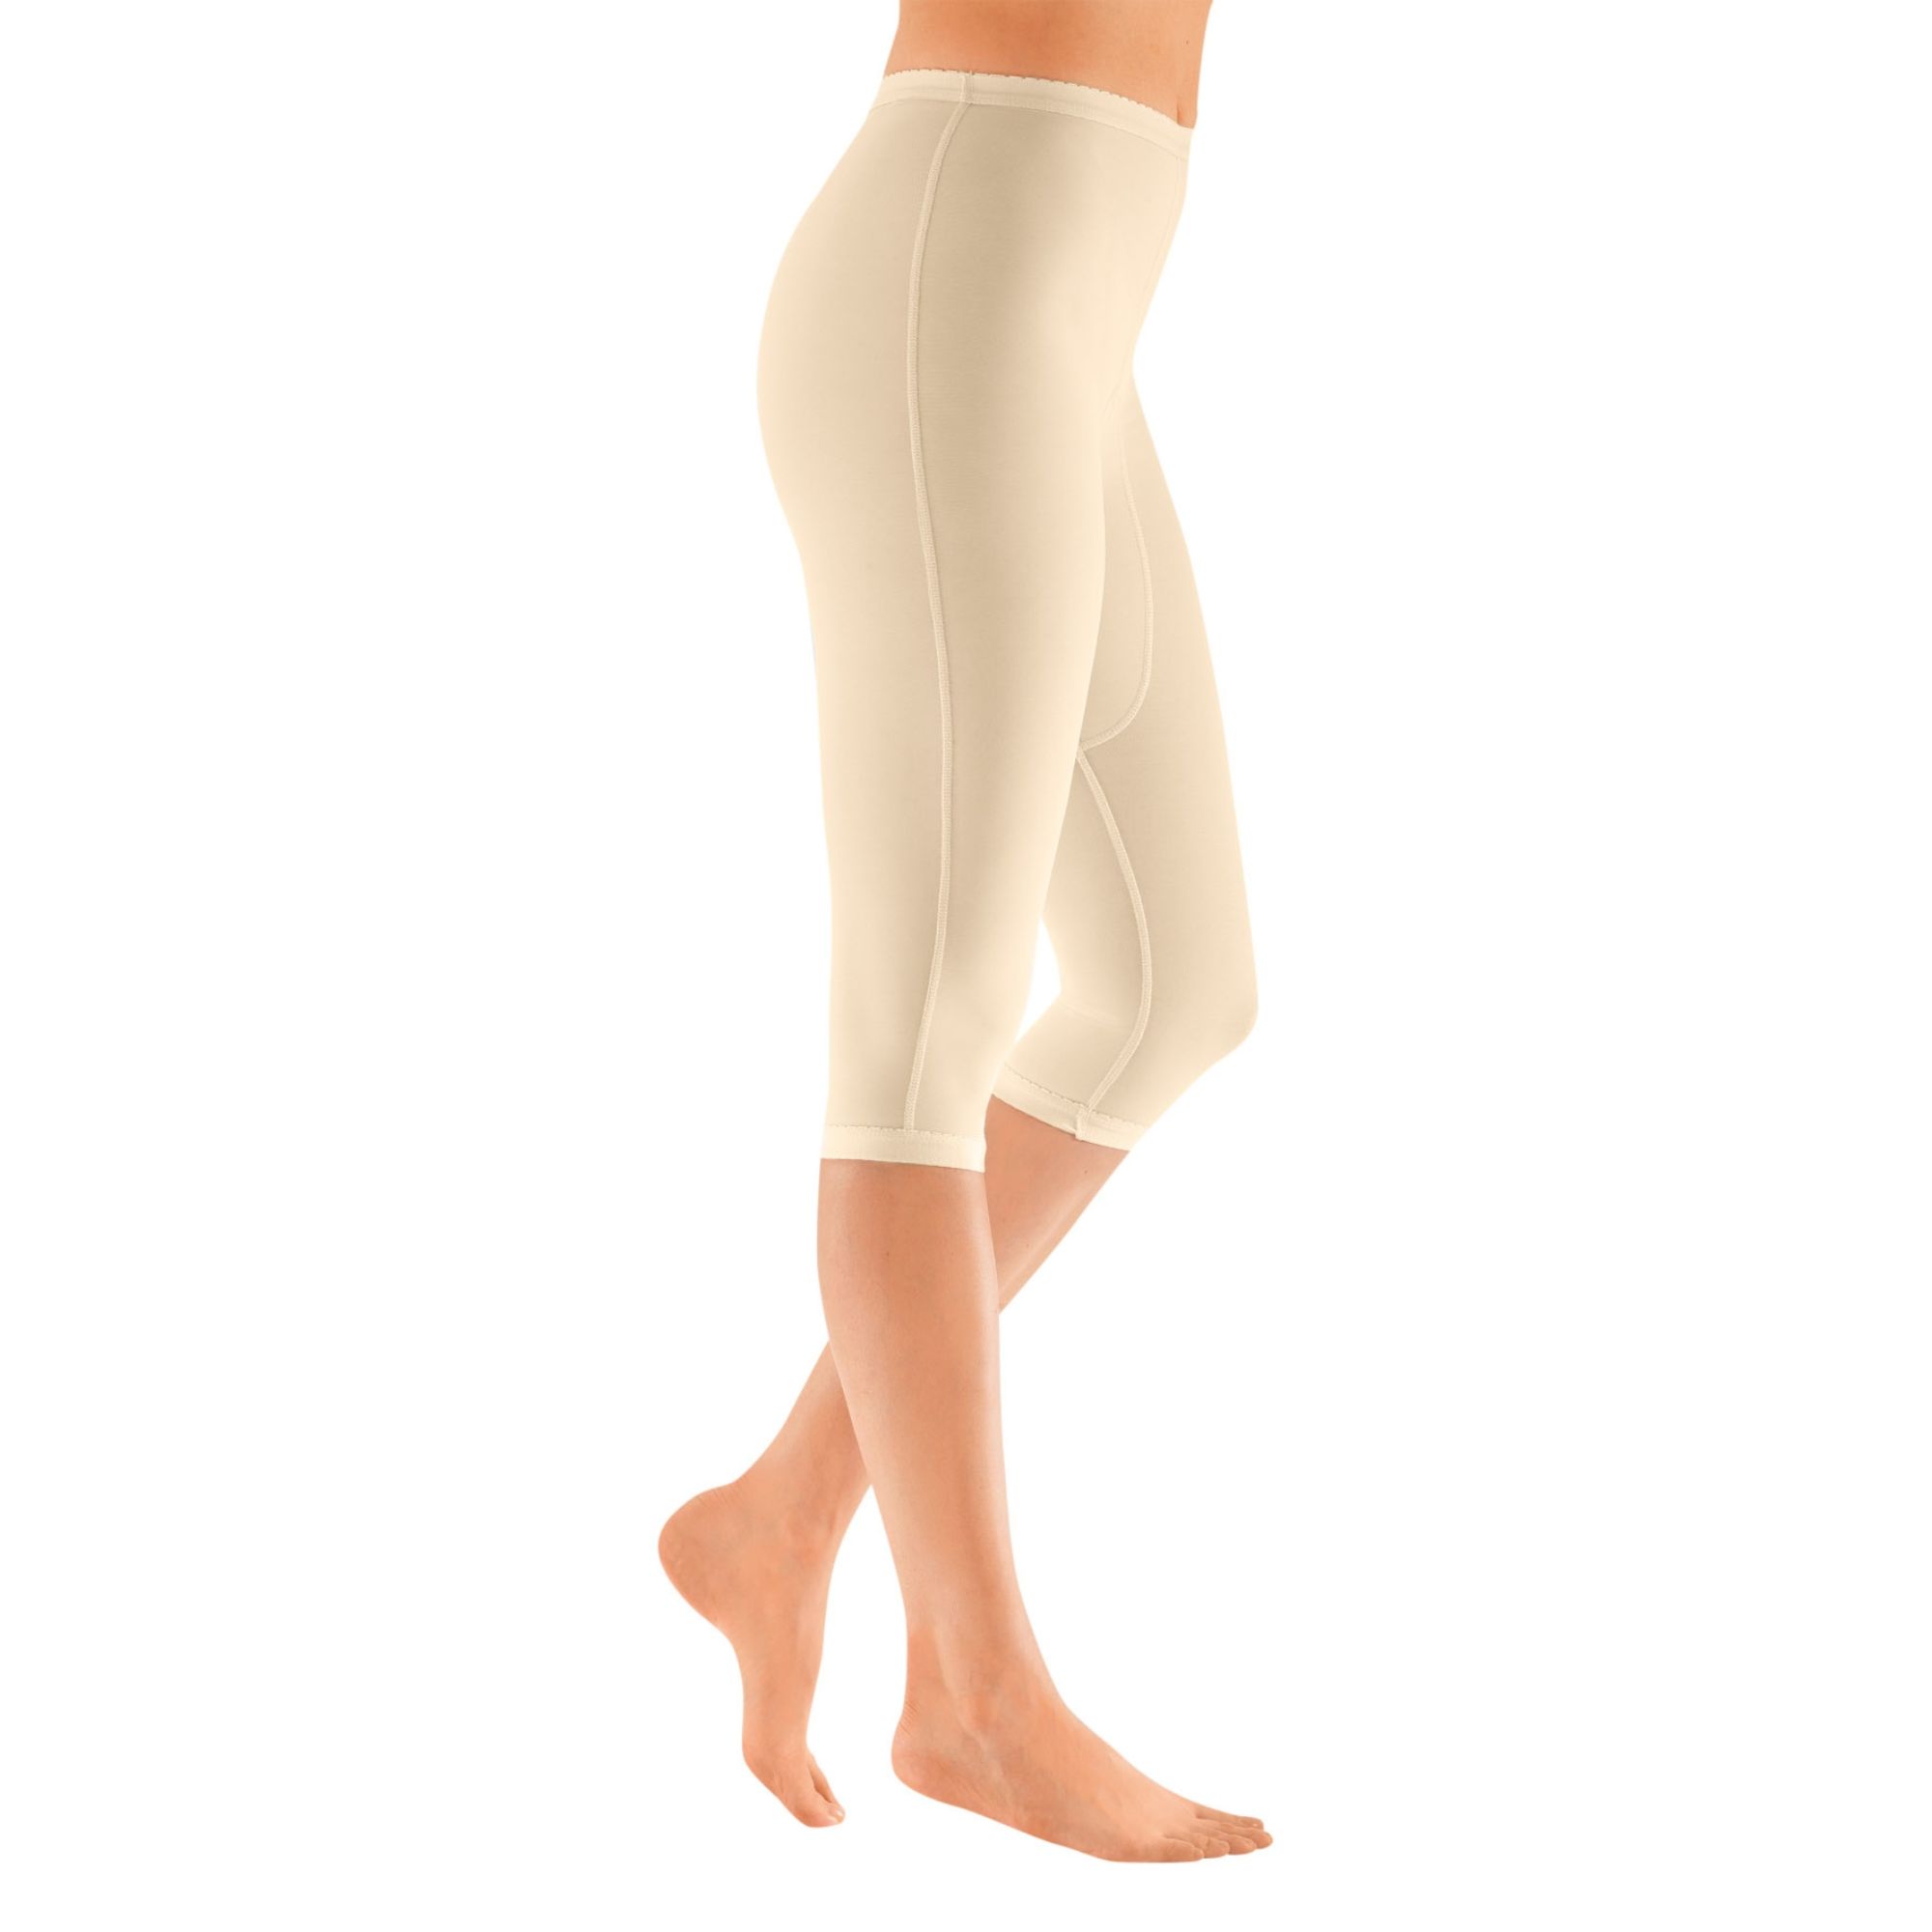 Silicone Patches & Compression Garments